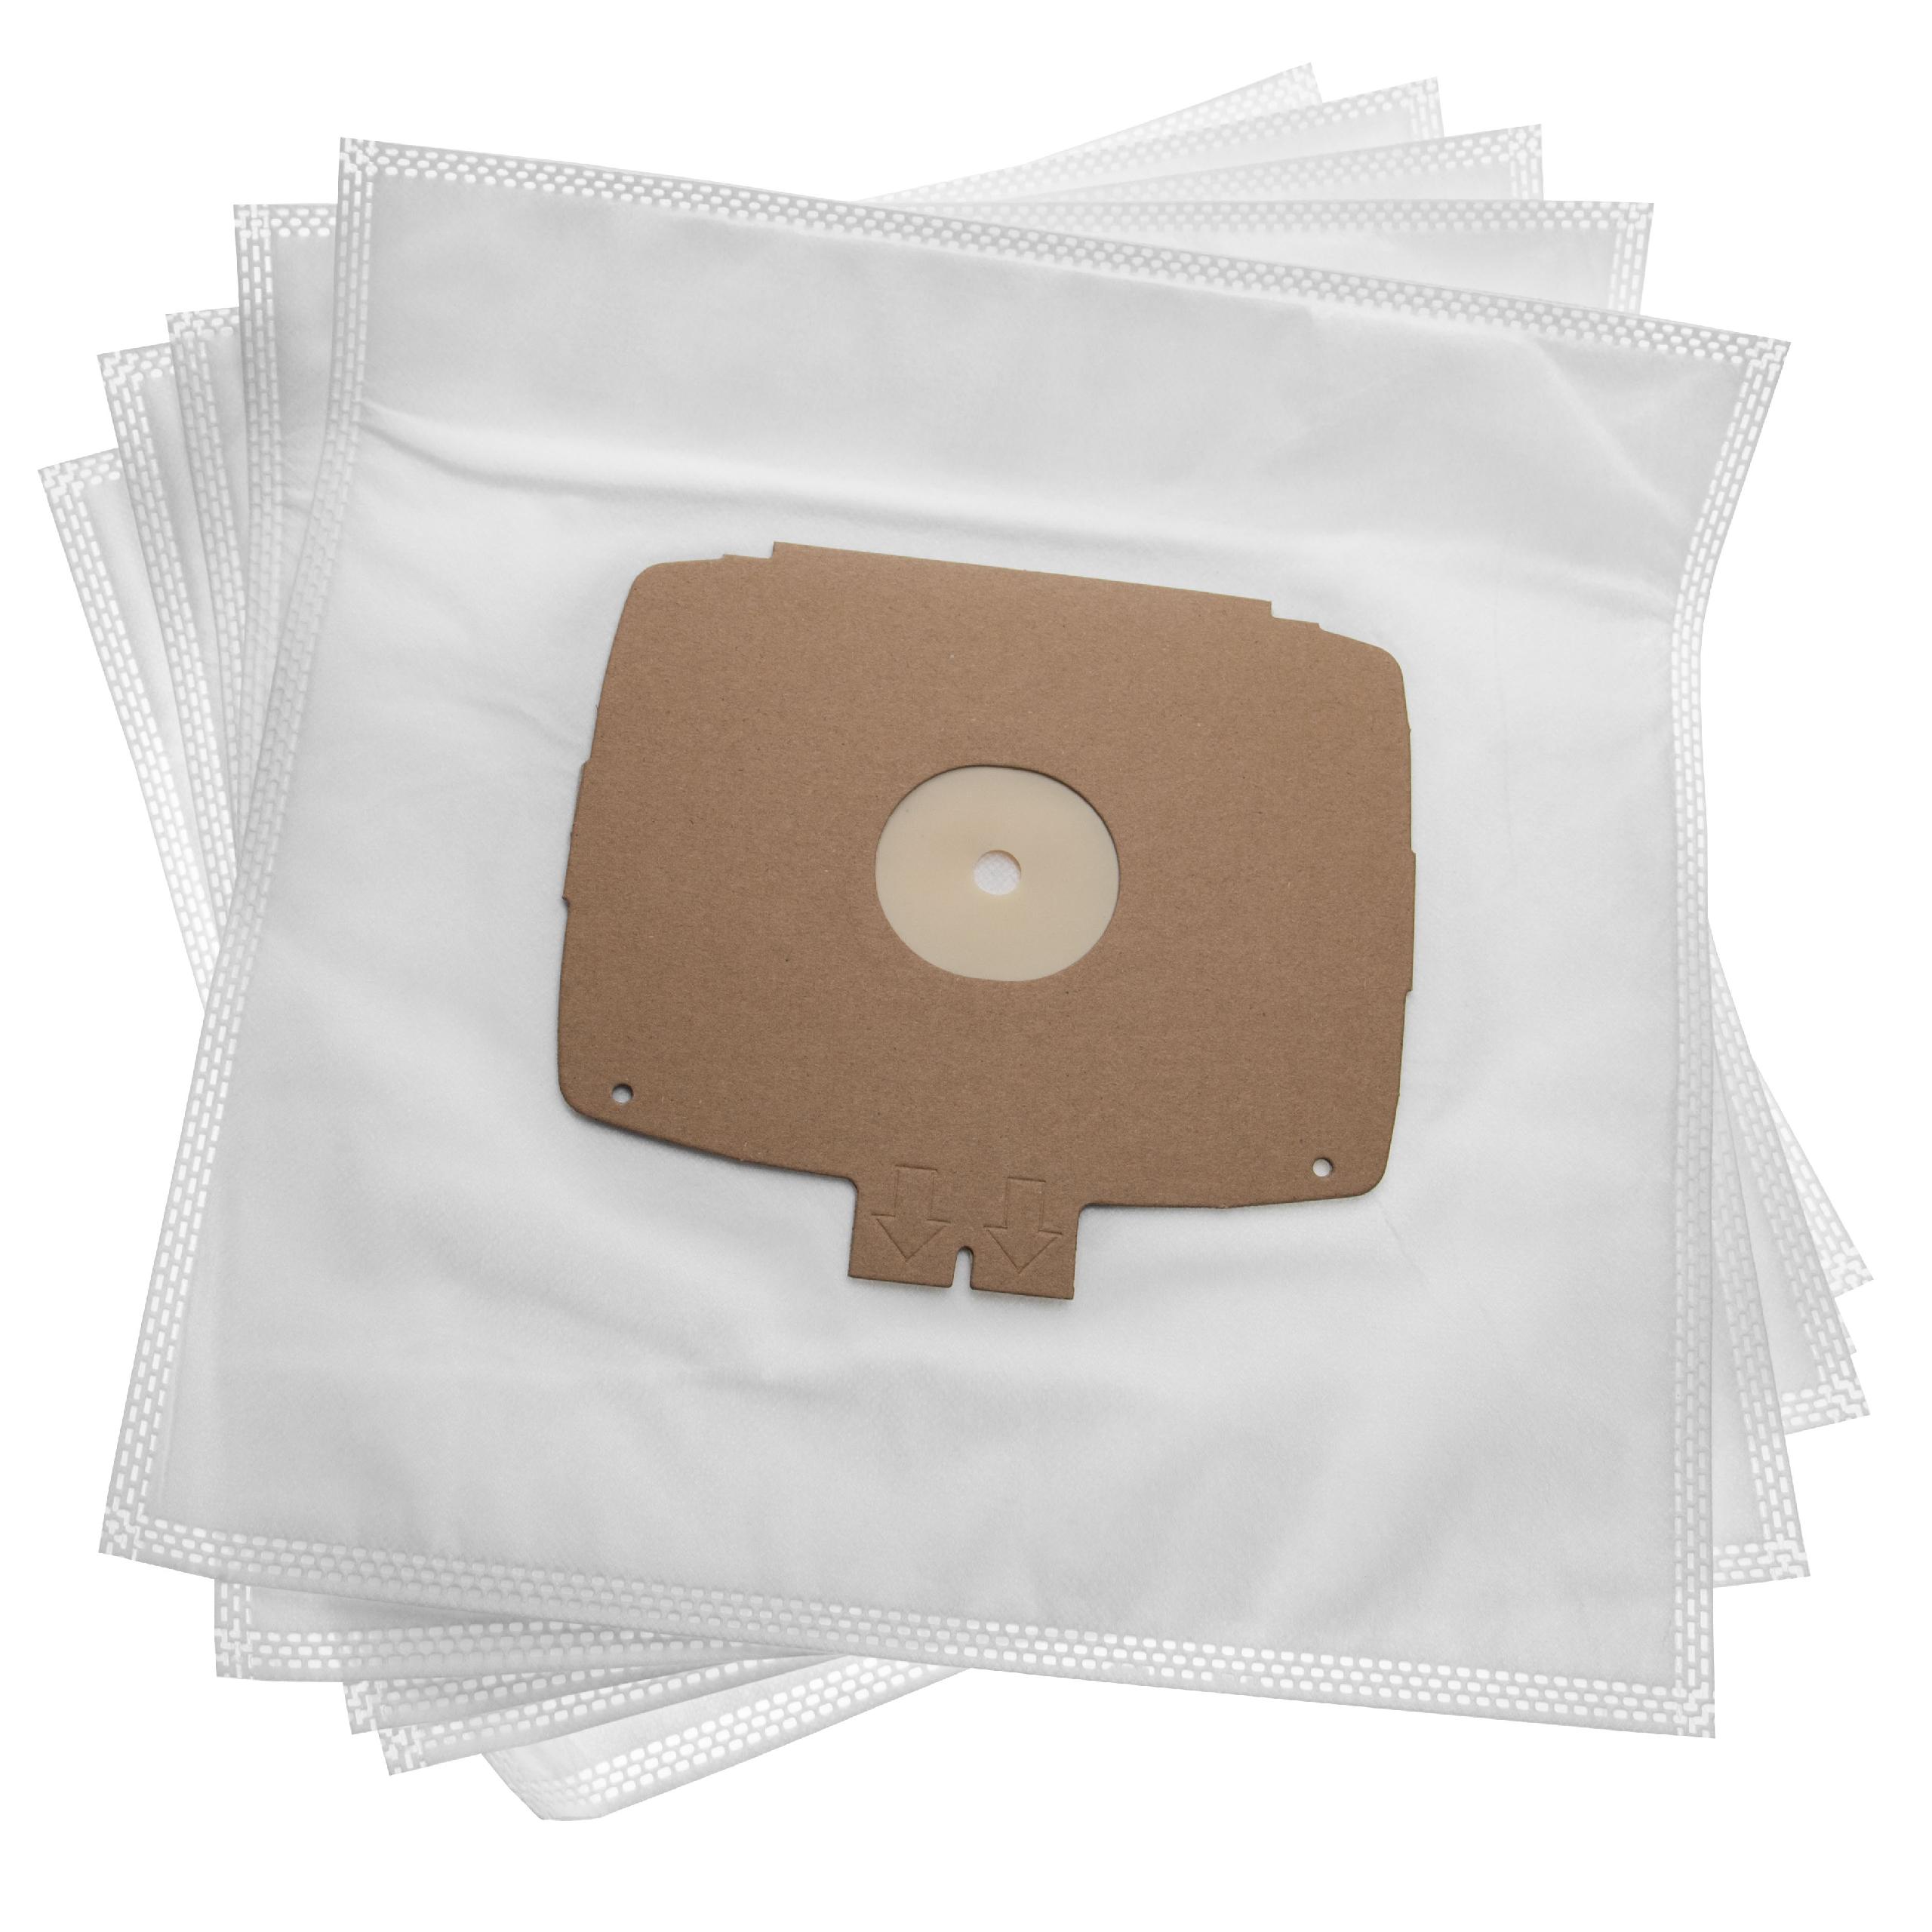 5x Vacuum Cleaner Bag replaces Europlus V2504 for Lloyds - microfleece